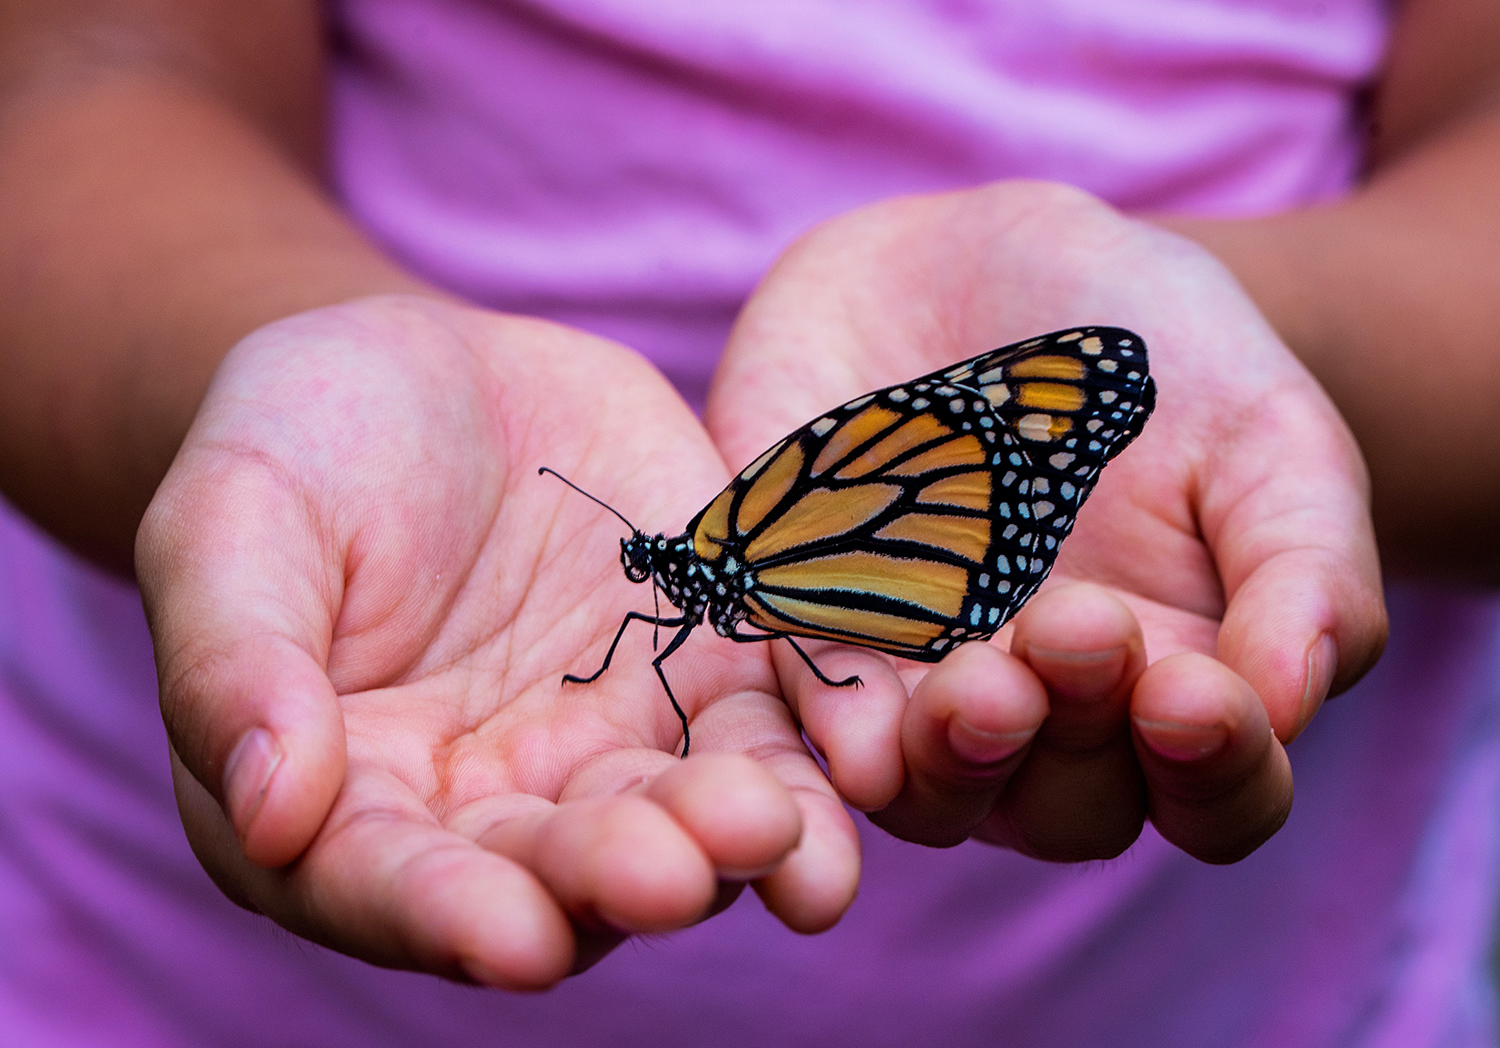 A Step-by-Step Guide to Planting a Butterfly Garden